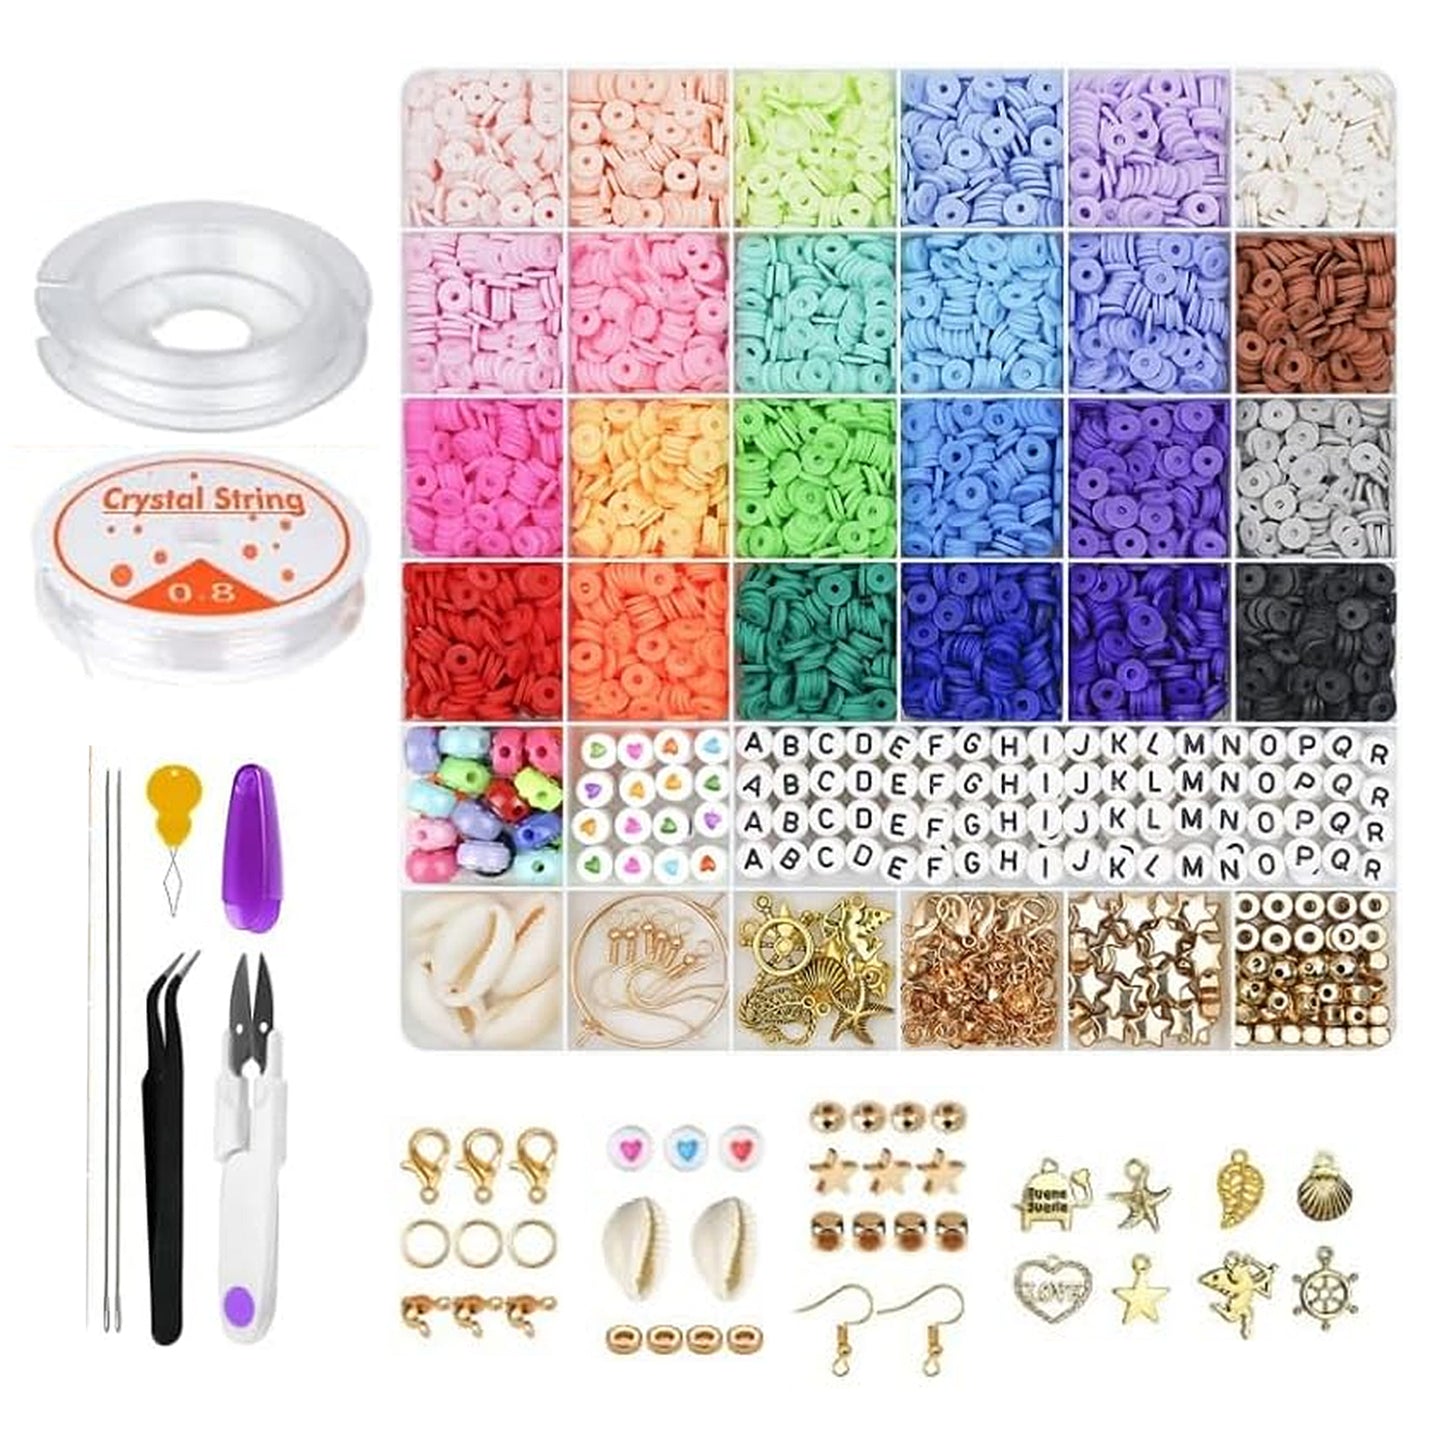 6000+ Clay Beads Friendship Bracelet Making Kit, Flat Preppy Polymer Heirship Beads for Jewelry Making with Pendant Charms for Girls Teens Ages 6-12